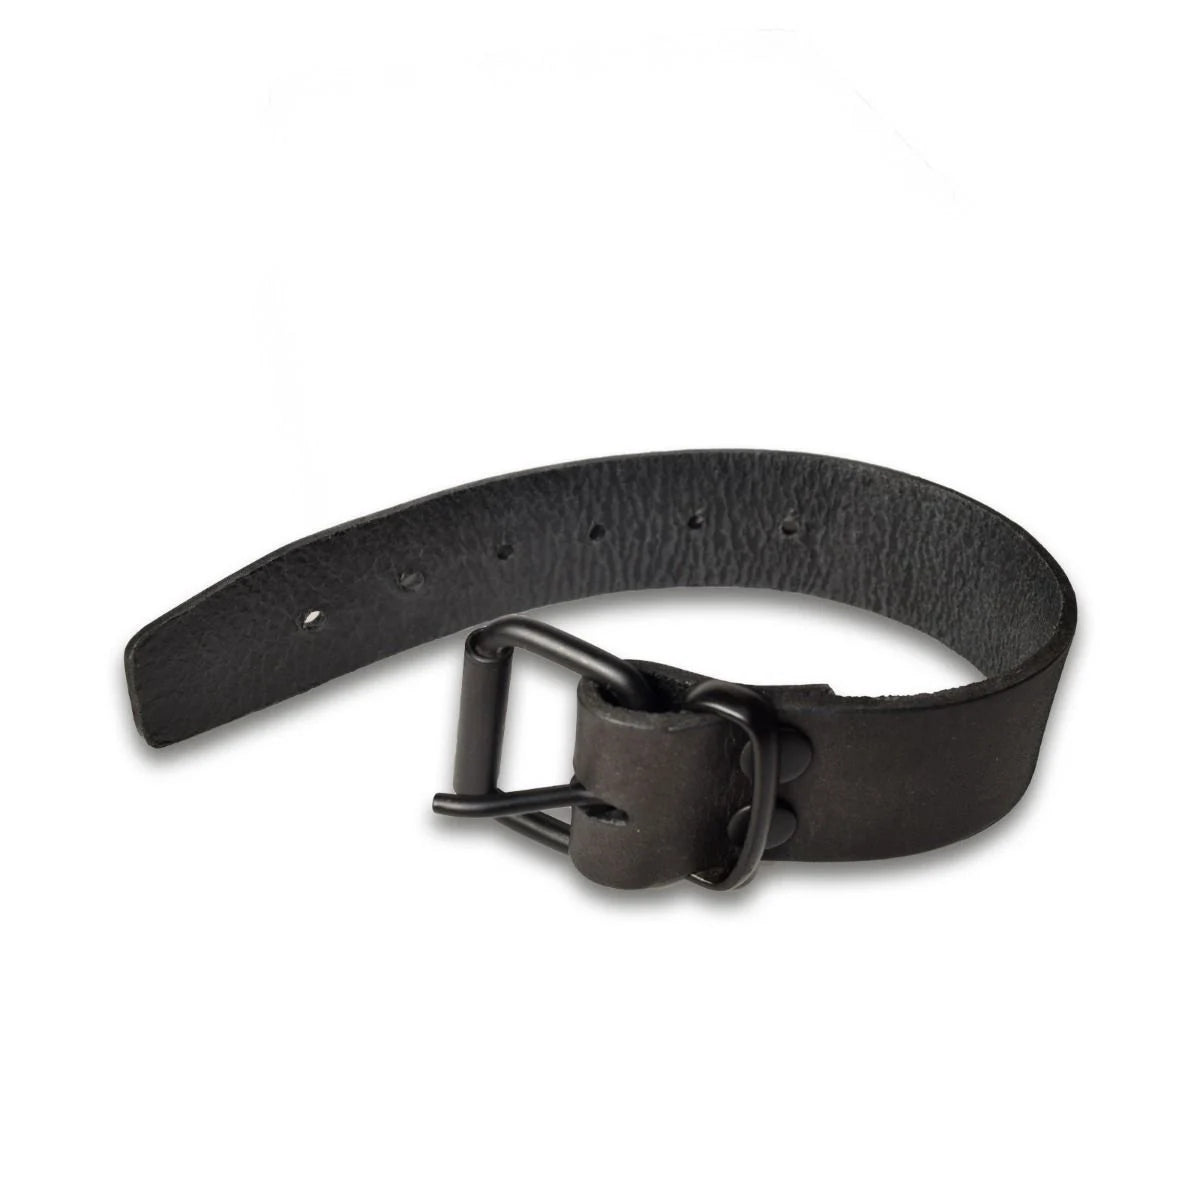 Prowler RED Leather Buckle Bicep Band Black XL